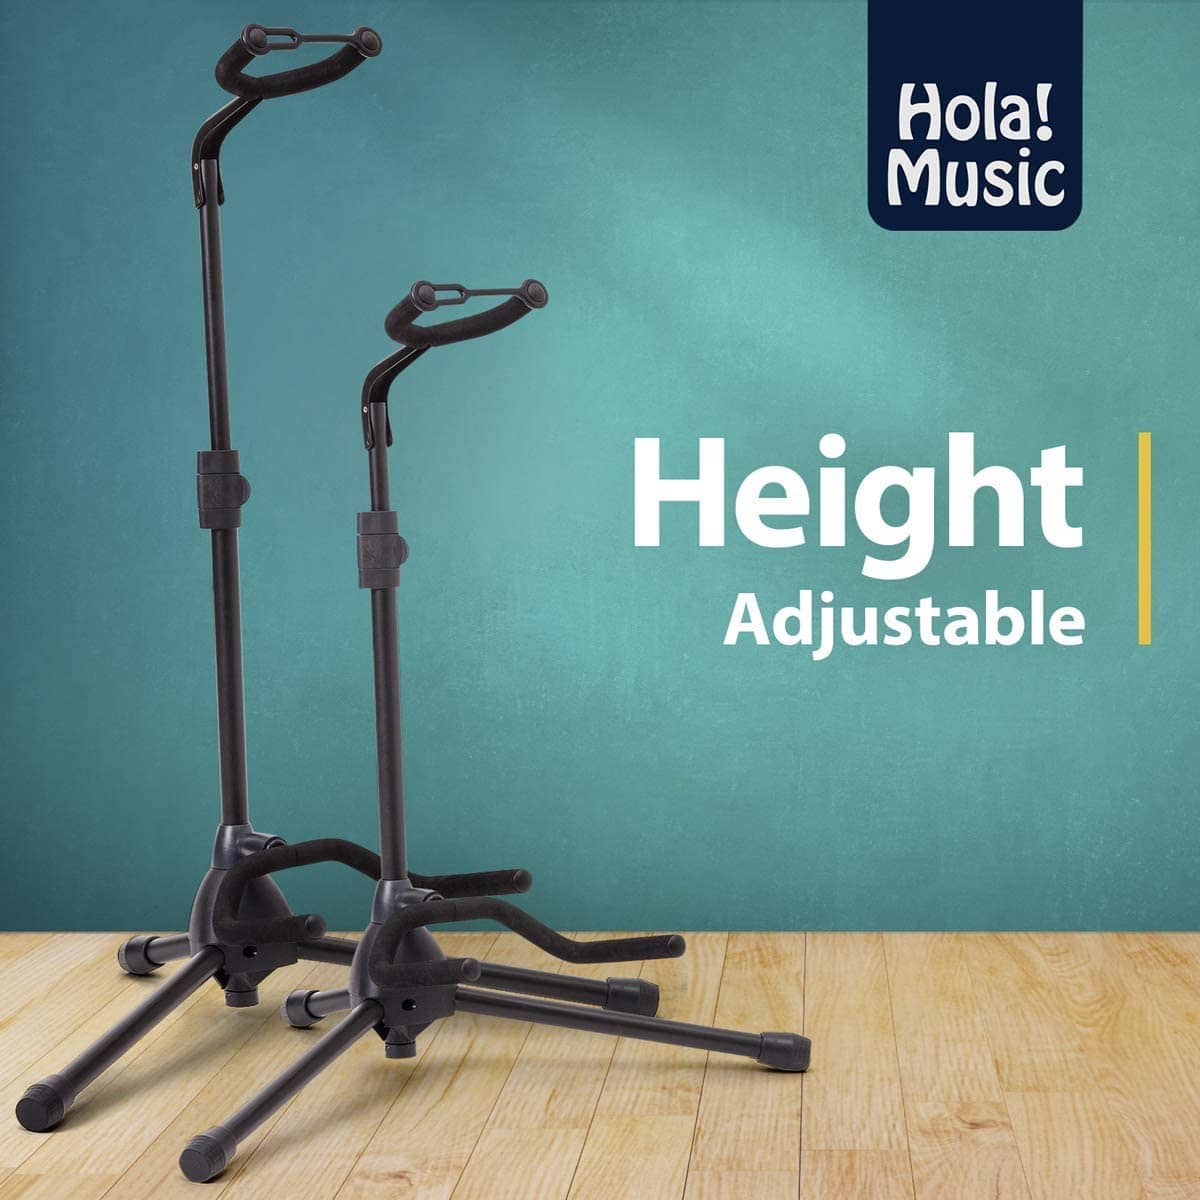 Universal Guitar Stand by Hola! Music – Fits Acoustic, Classical, Electric, Bass Guitars, Mandolins, Banjos, Ukuleles and Other Stringed Instruments – Black 10